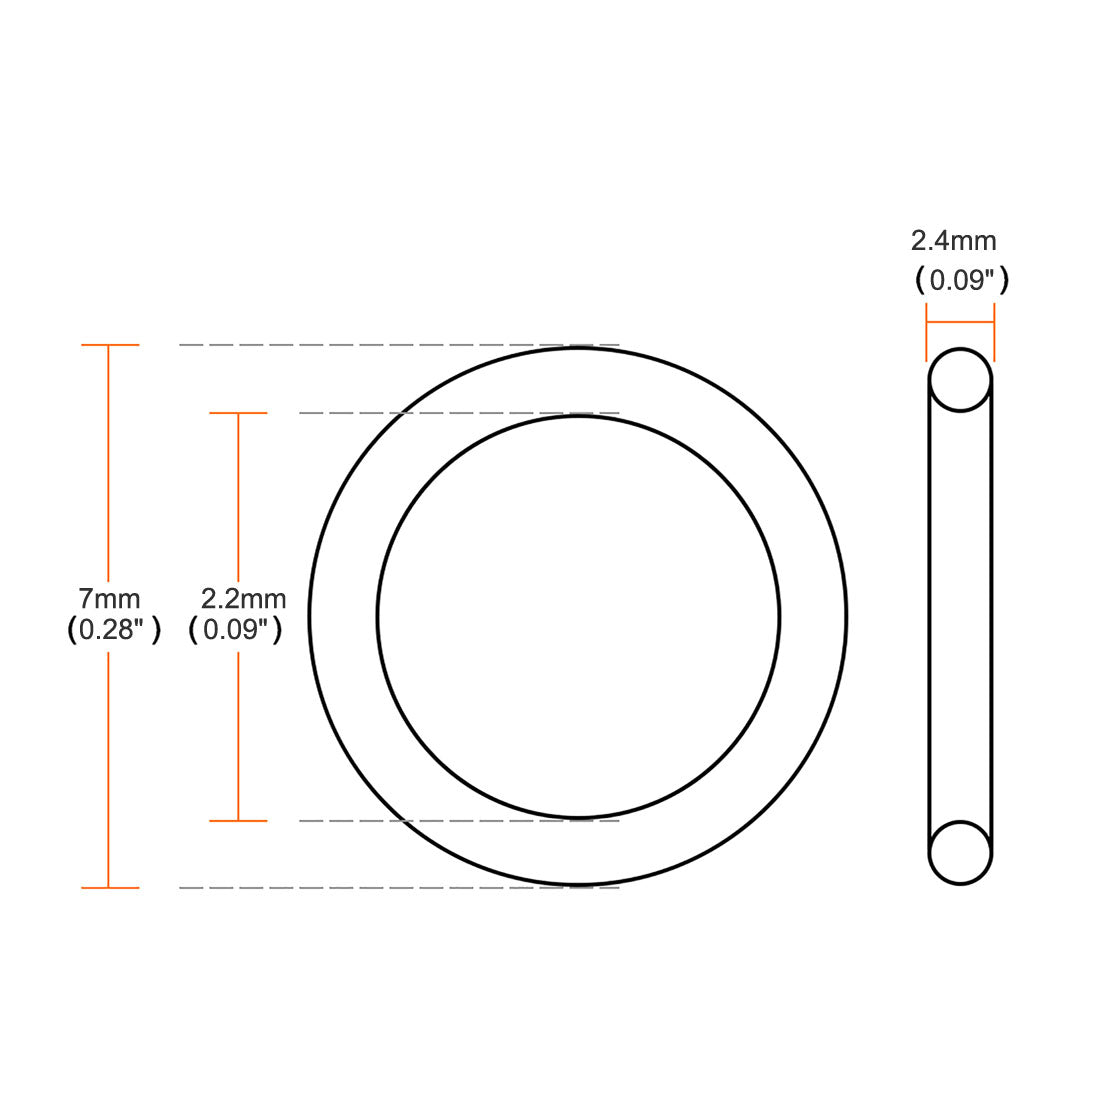 uxcell Uxcell Silicone O-Rings 7mm OD, 2.2mm Inner Diameter, 2.4mm Width, Seal Gasket White 10Pcs